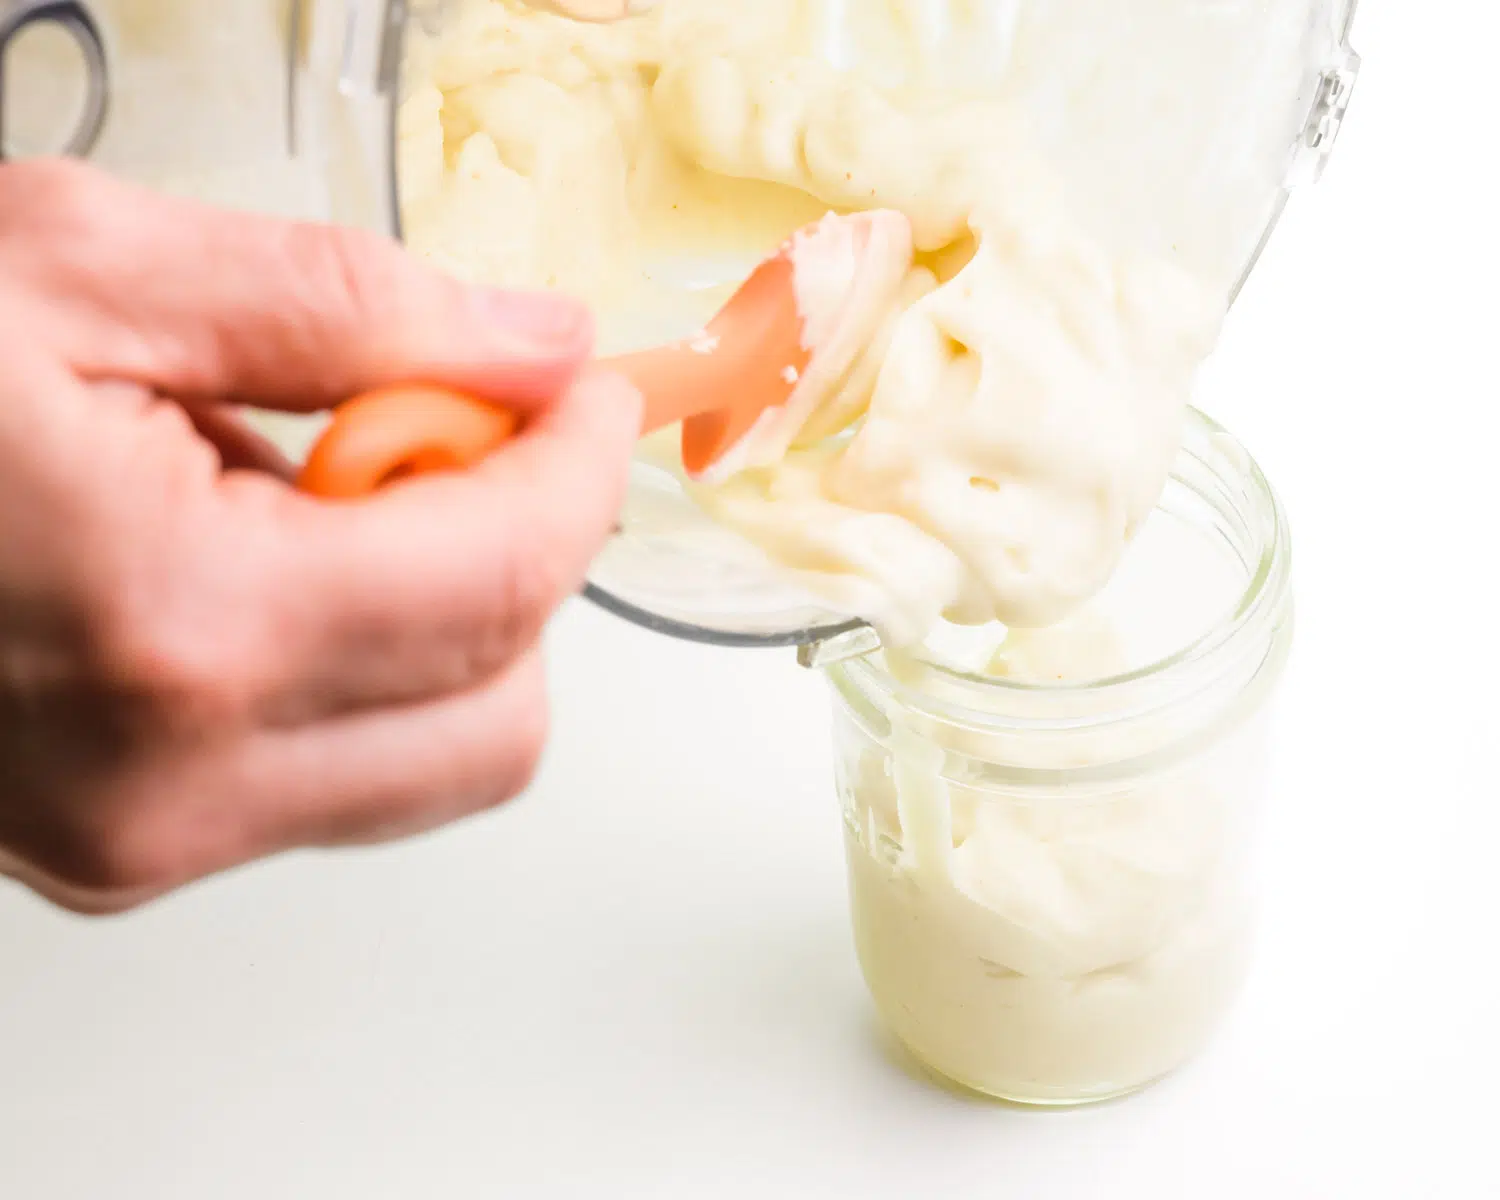 Vegan mayonnaise is being transferred from a food processor to a mason jar.